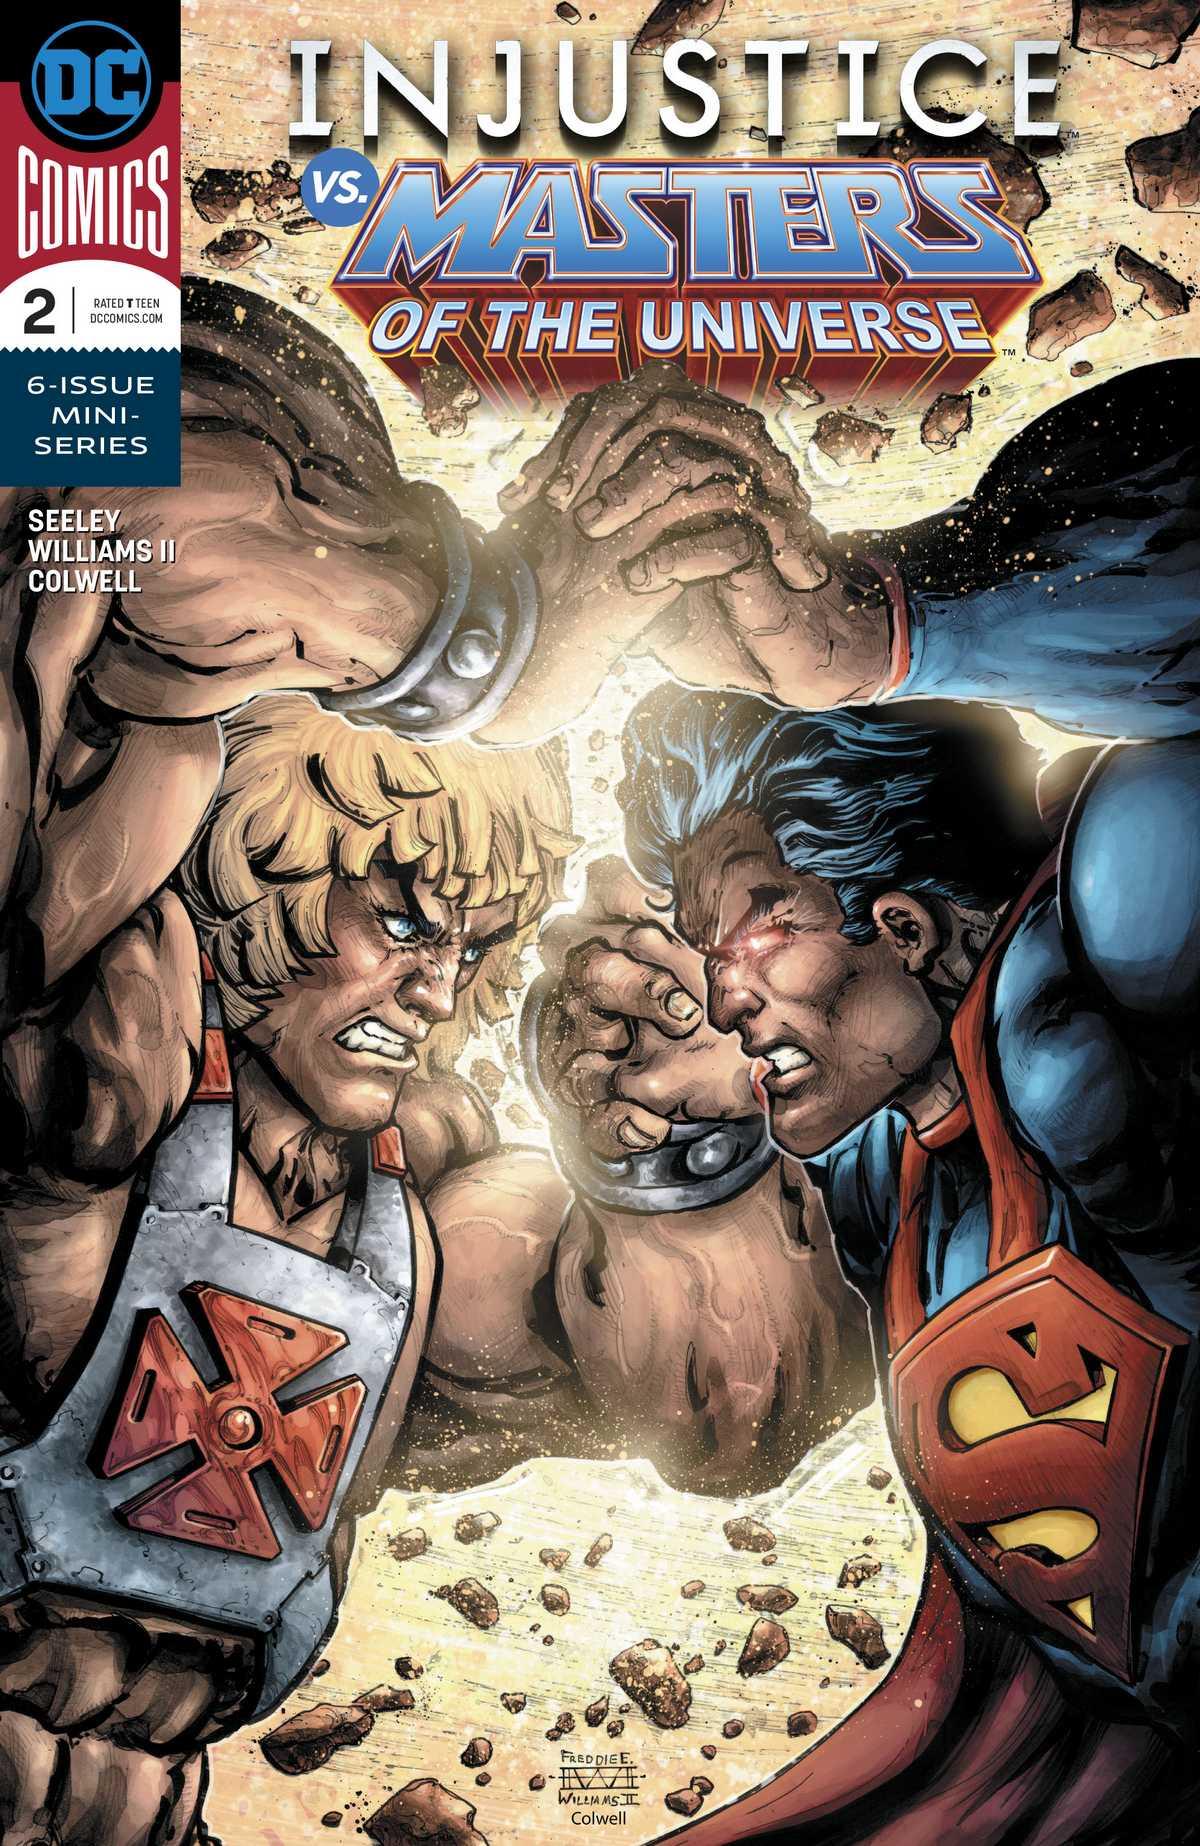 Injustice vs. Masters of the Universe Vol. 1 #2